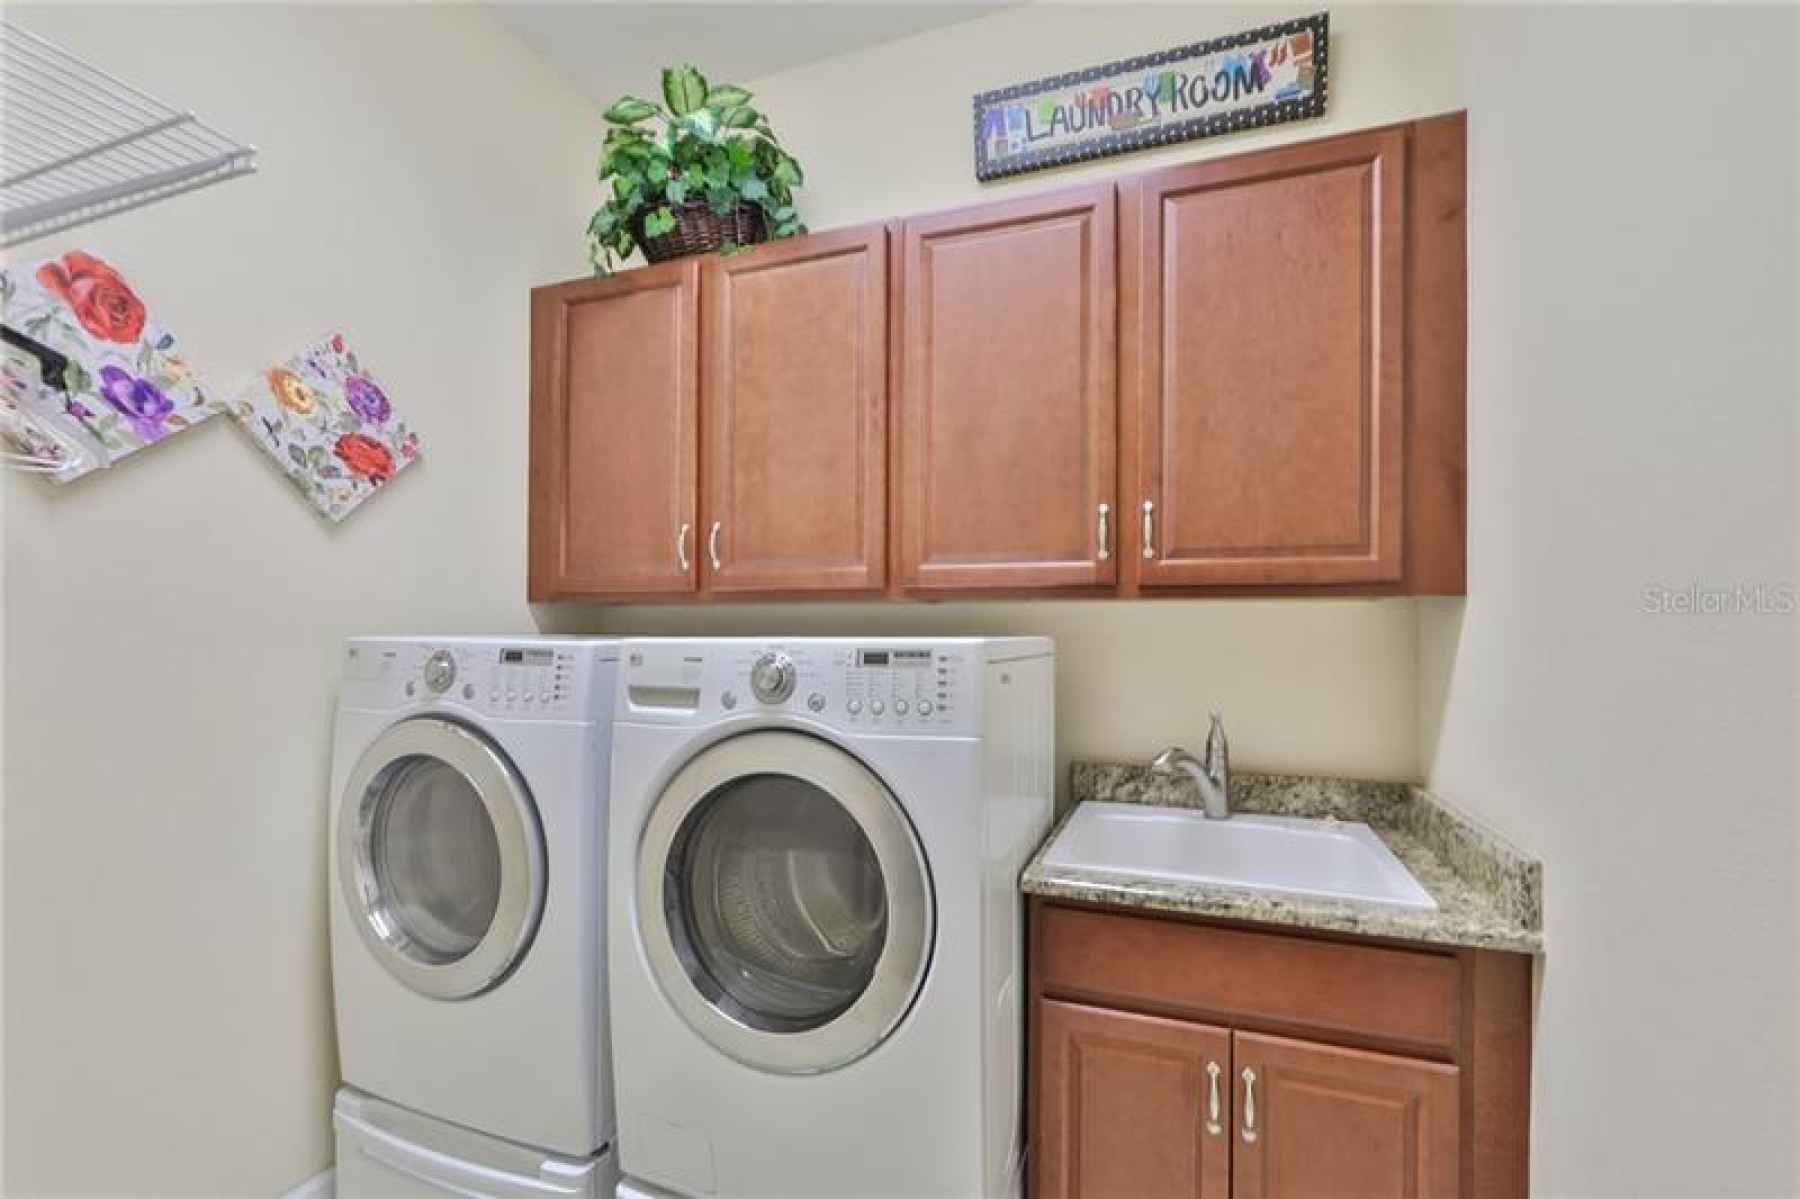 The laundry room is good size, with shelving, cabinetry and a granite countered utility sink.